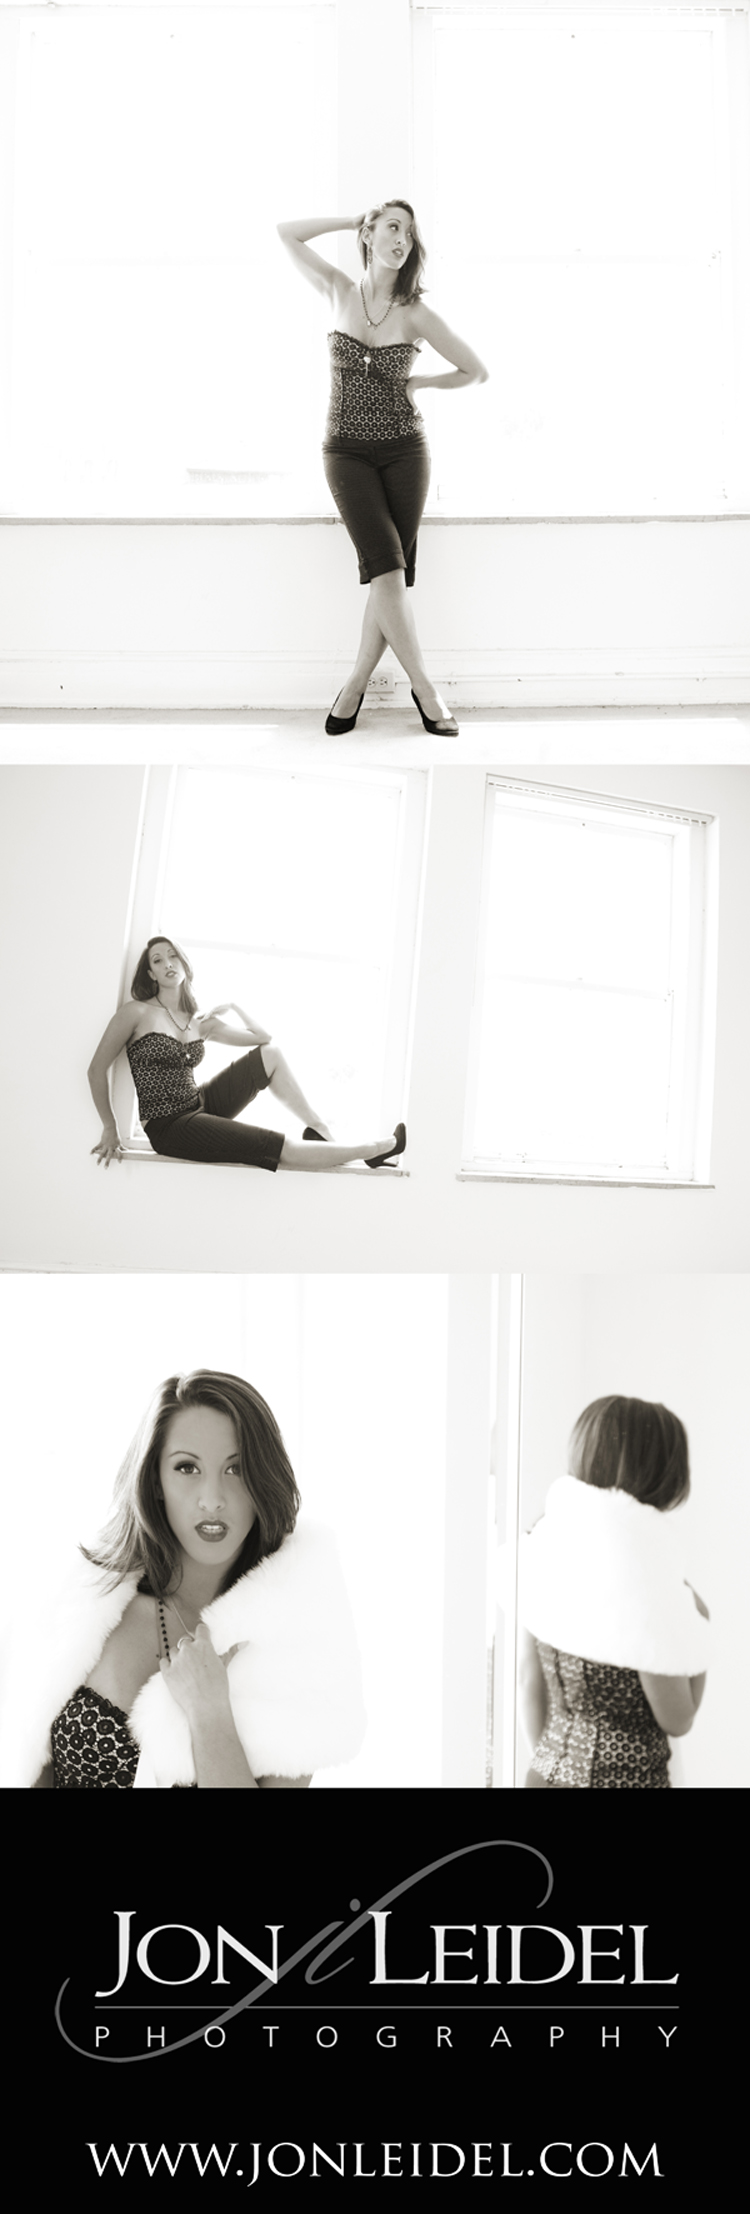 Male and Female model photo shoot of Jon Leidel Photography and Grace James in Studio